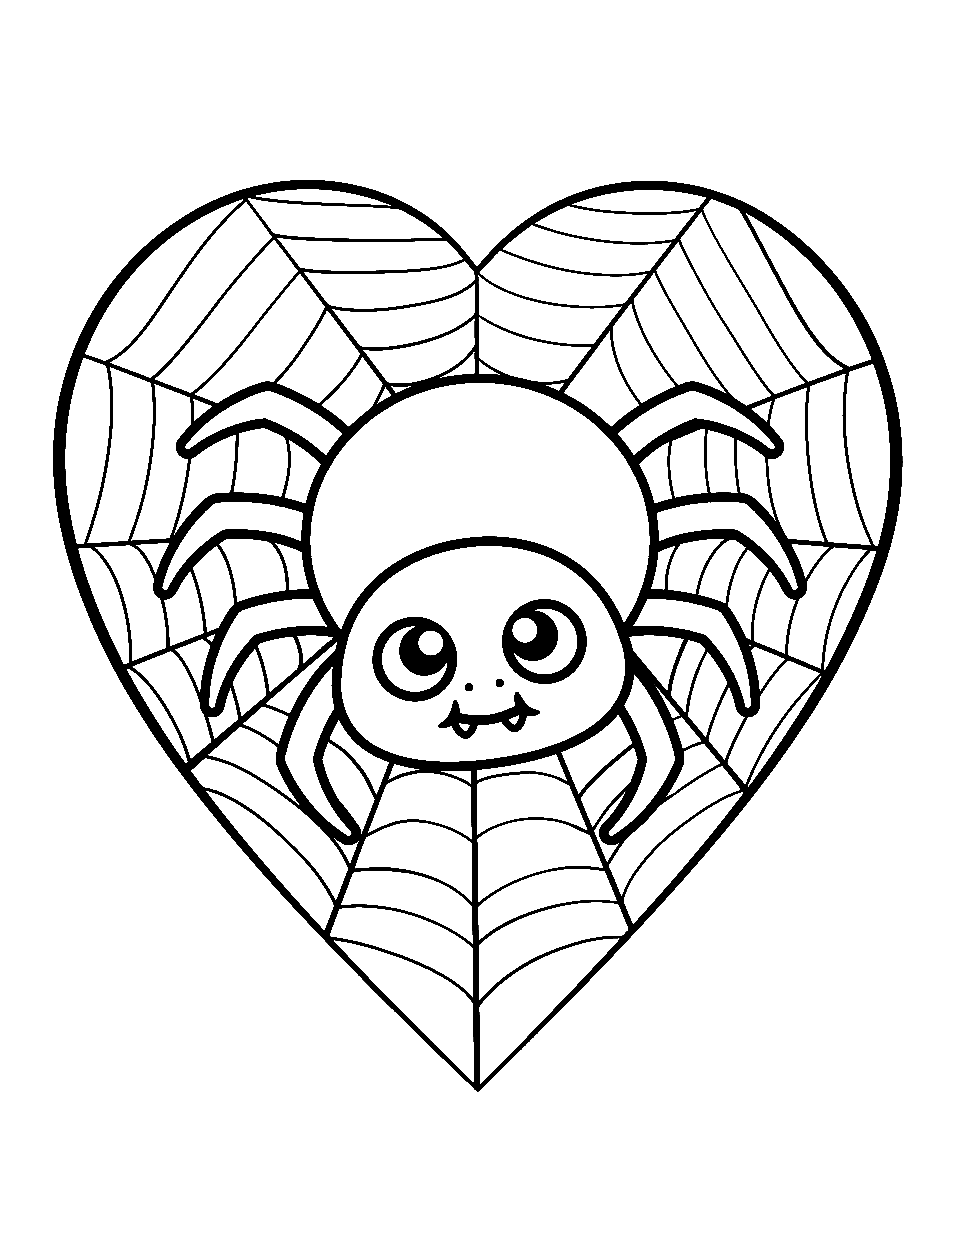 Spider Spinning a Heart Web Coloring Page - A spider in the center of its heart-shaped web.